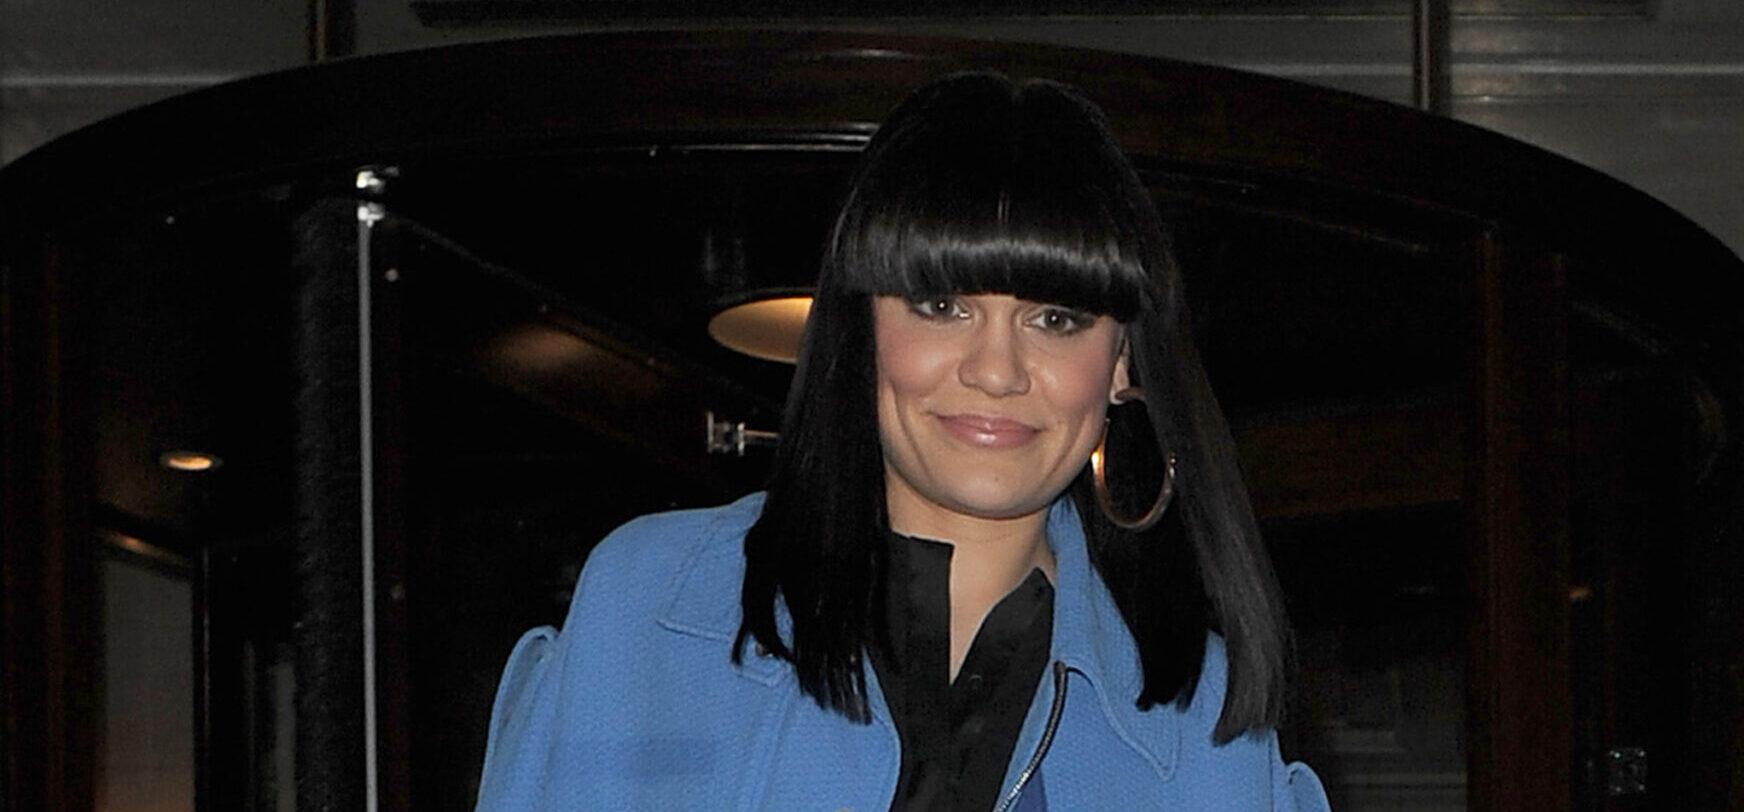 Jessie J Drops It Low Ahead of Birthing Her First Child, Describes Motherhood Experience